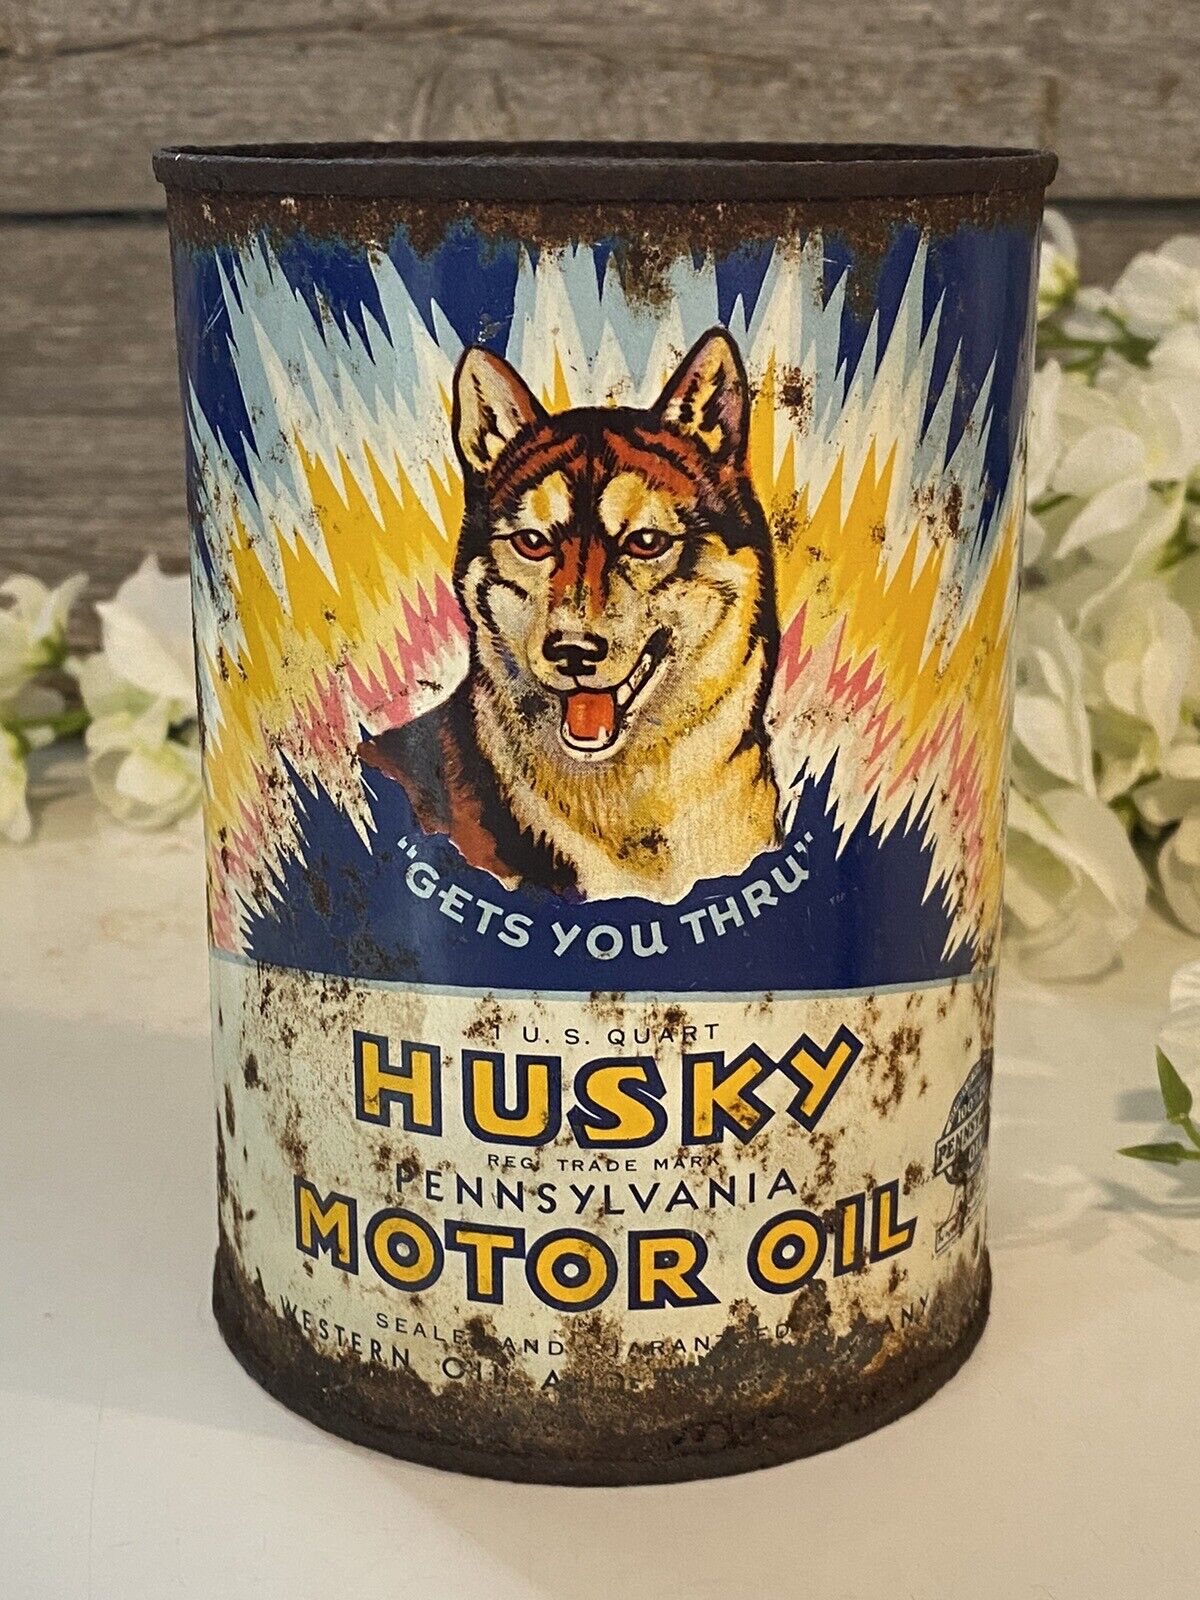 Full Antique Motor Oil Can Husky Western Oil and Fuel Company Pure Pennsylvania